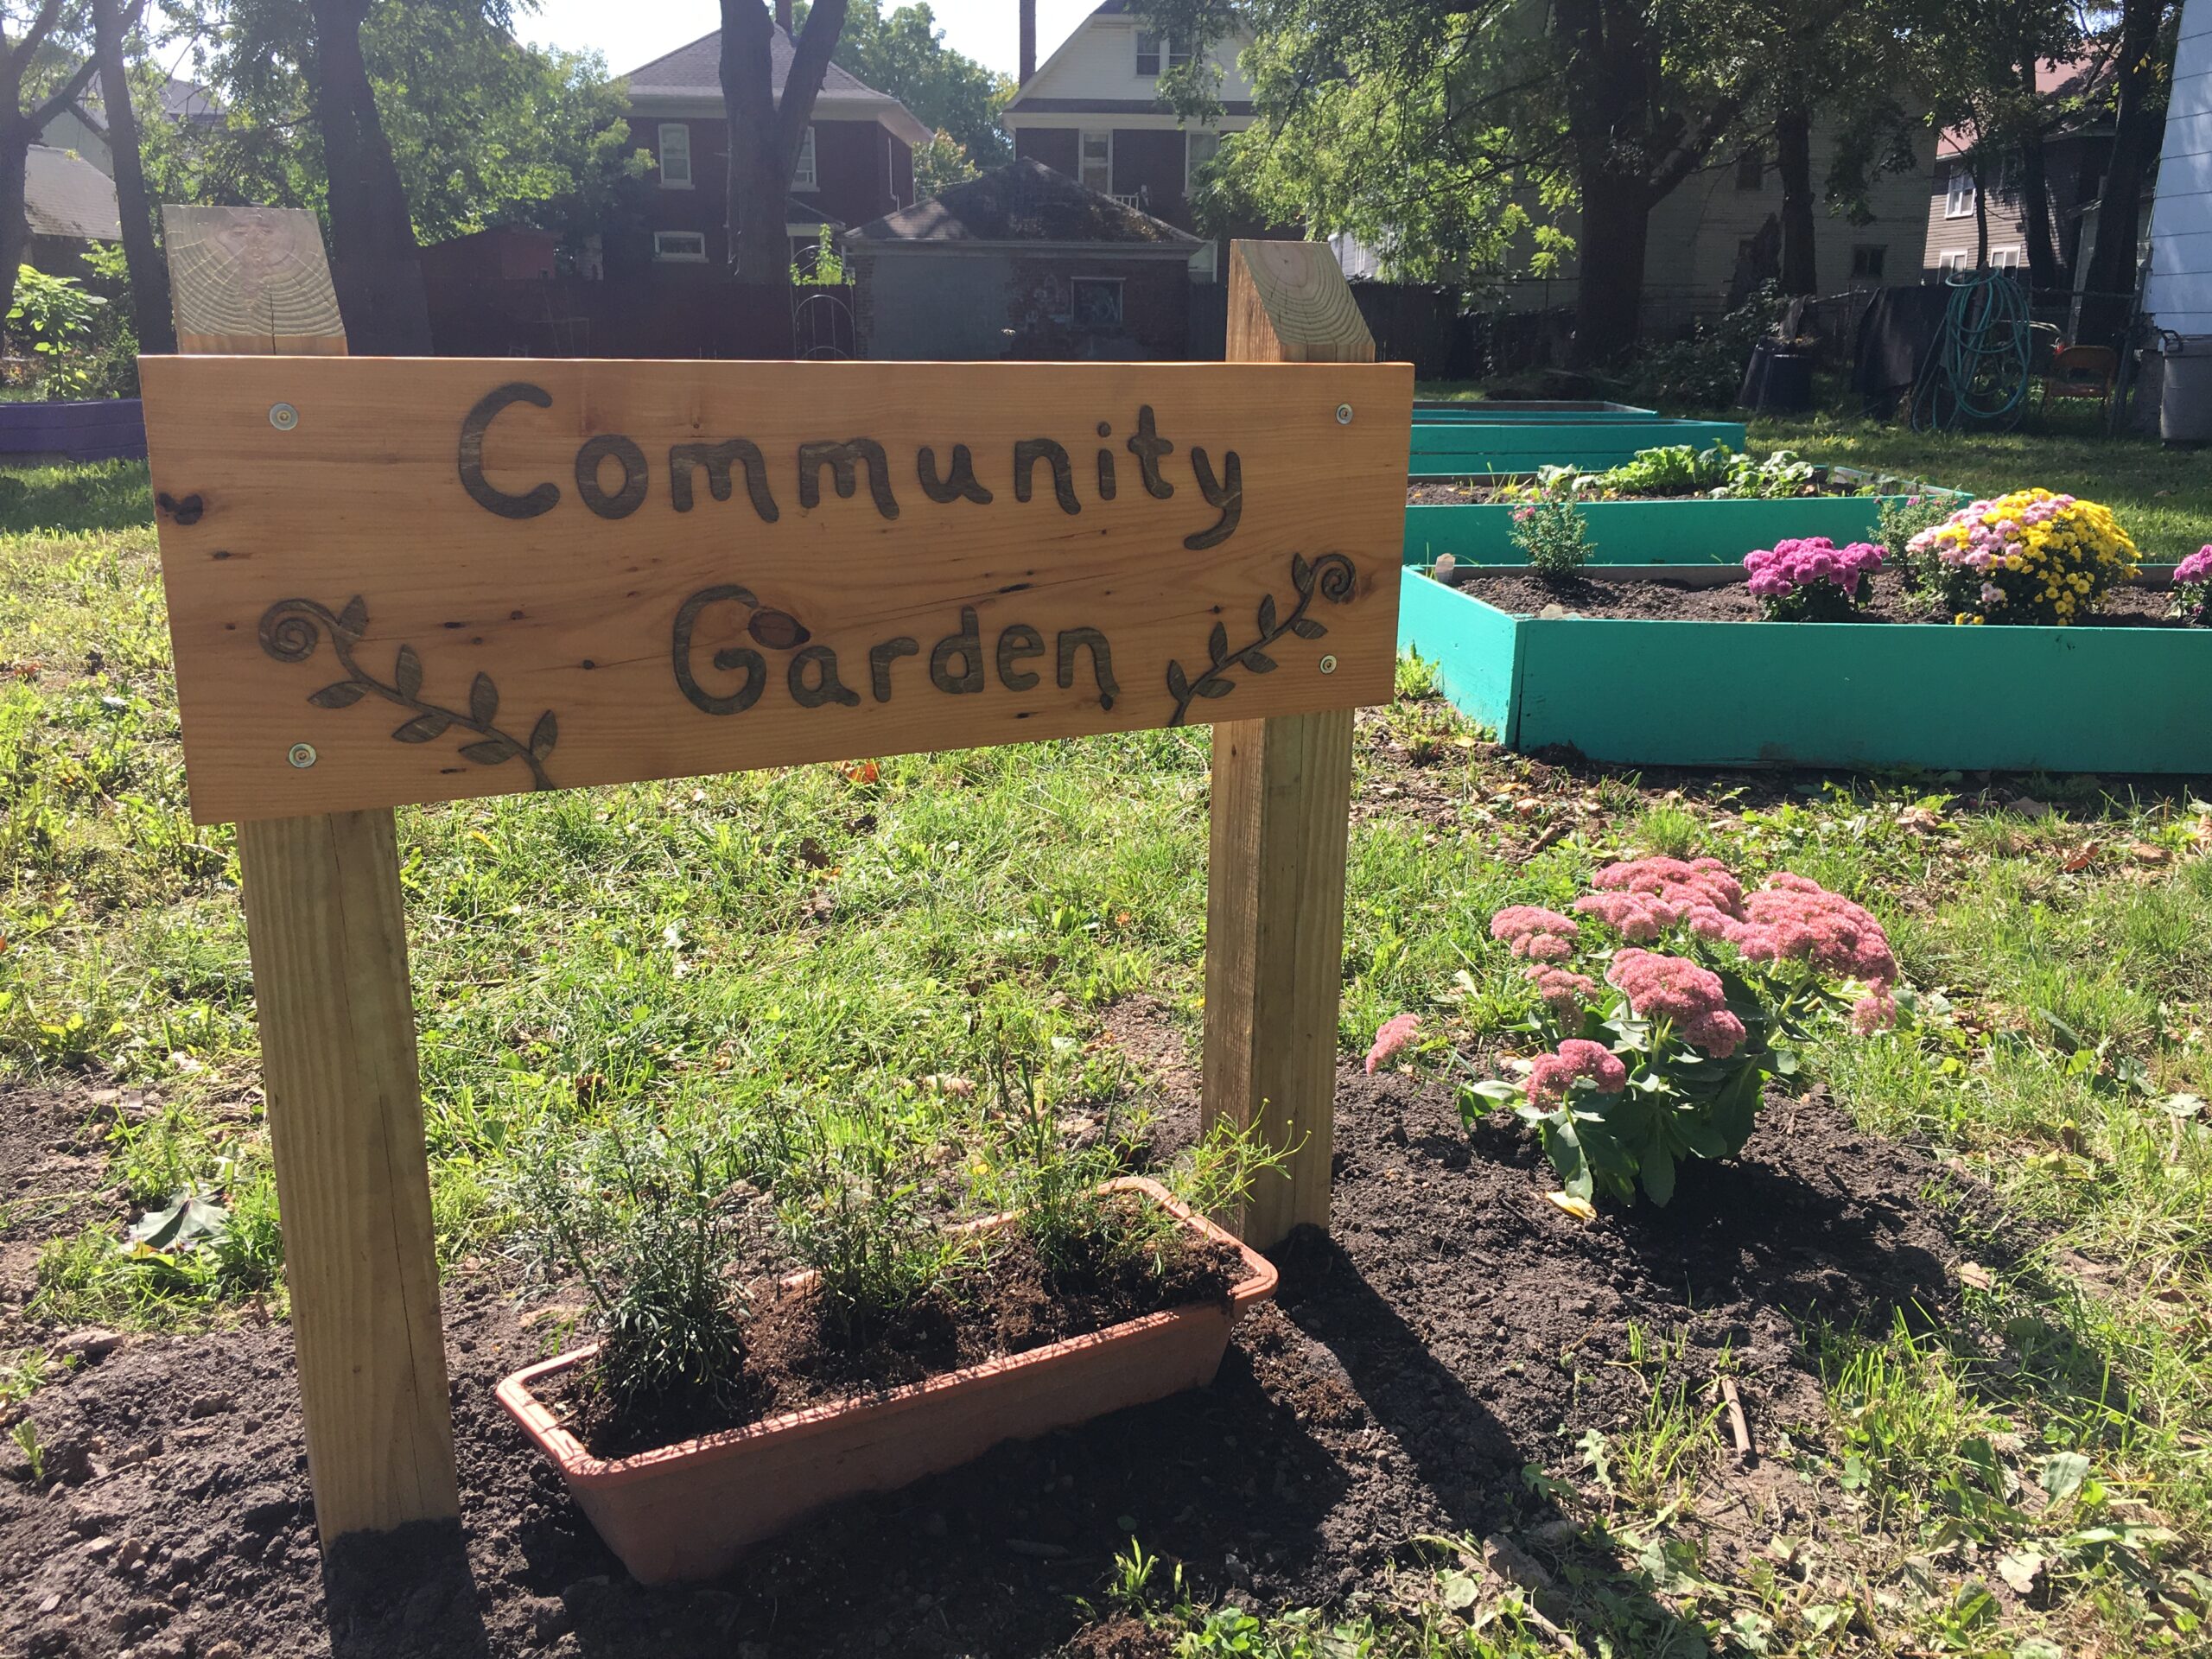 A wooden sign in front of a community garden in Niagara Falls.